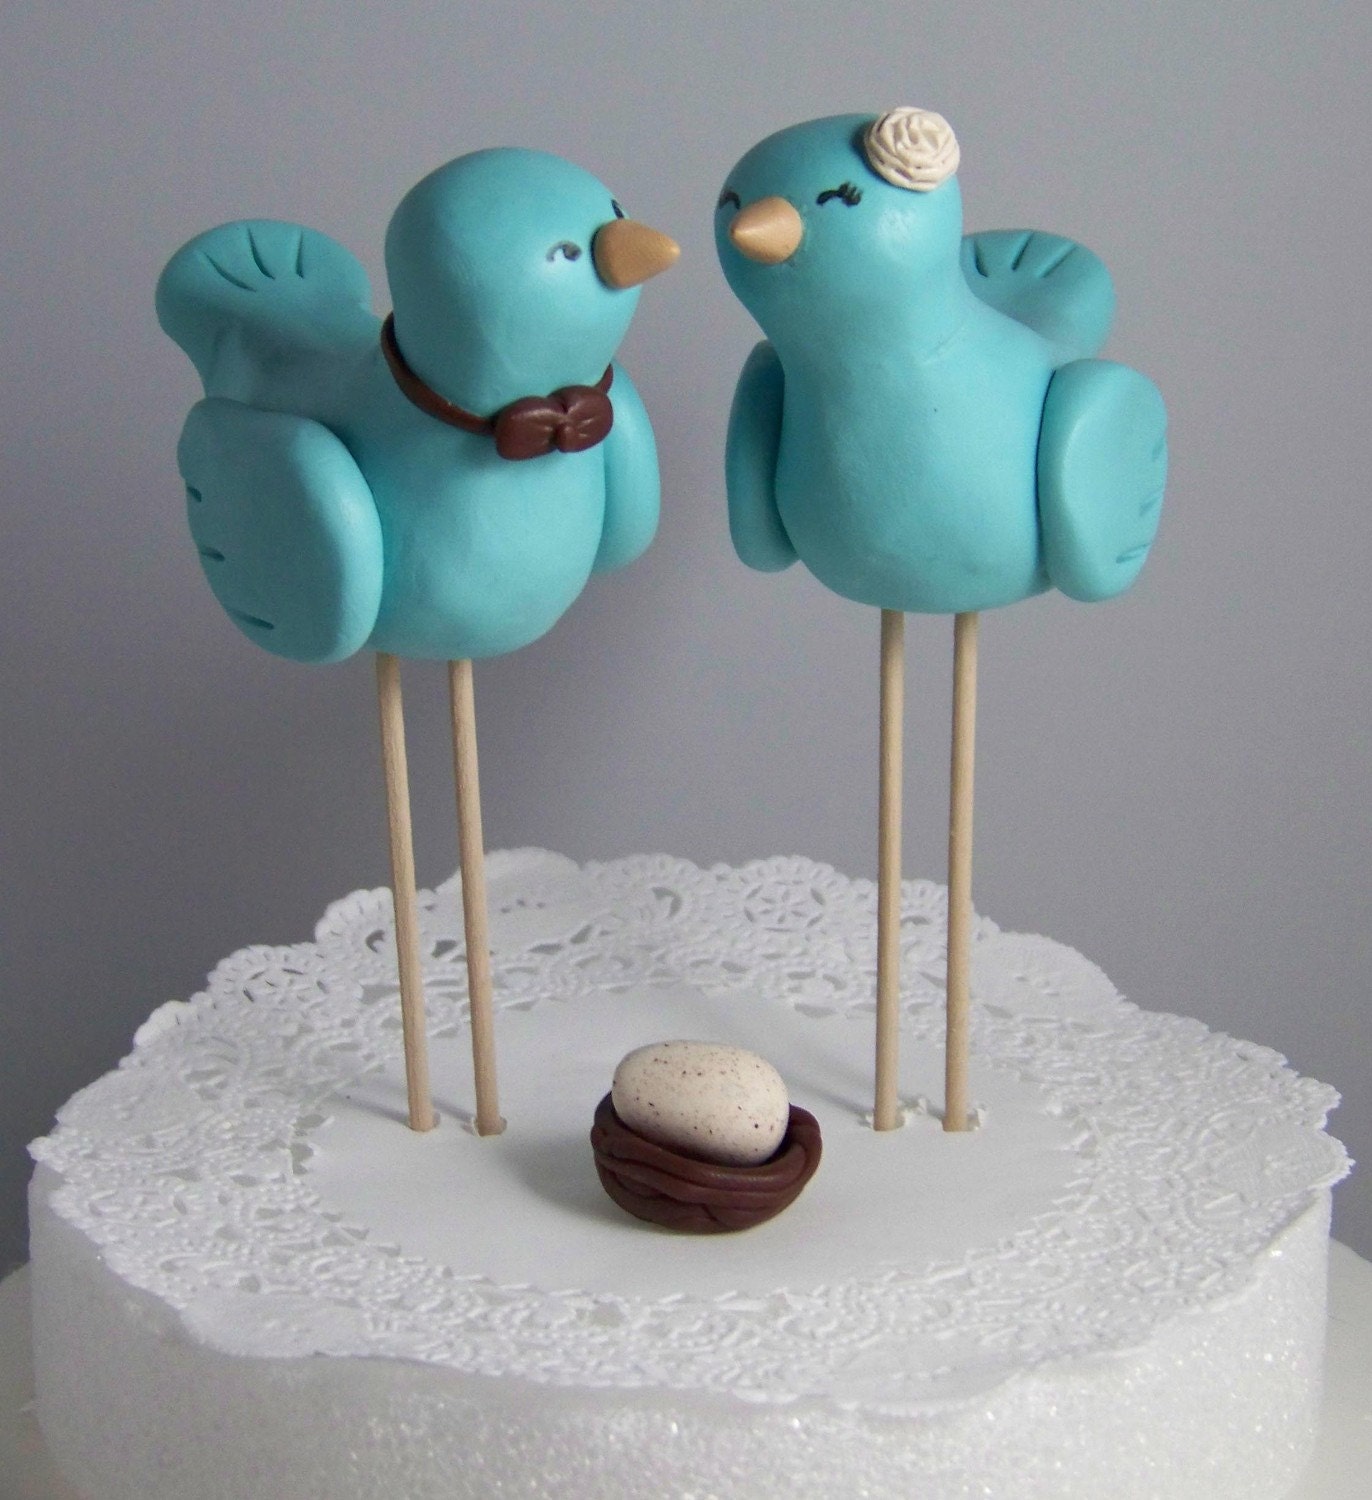 Large Nuzzling Love Birds Cake Topper with Nest and Speckled Egg Hand Sculpted Choice of Colors